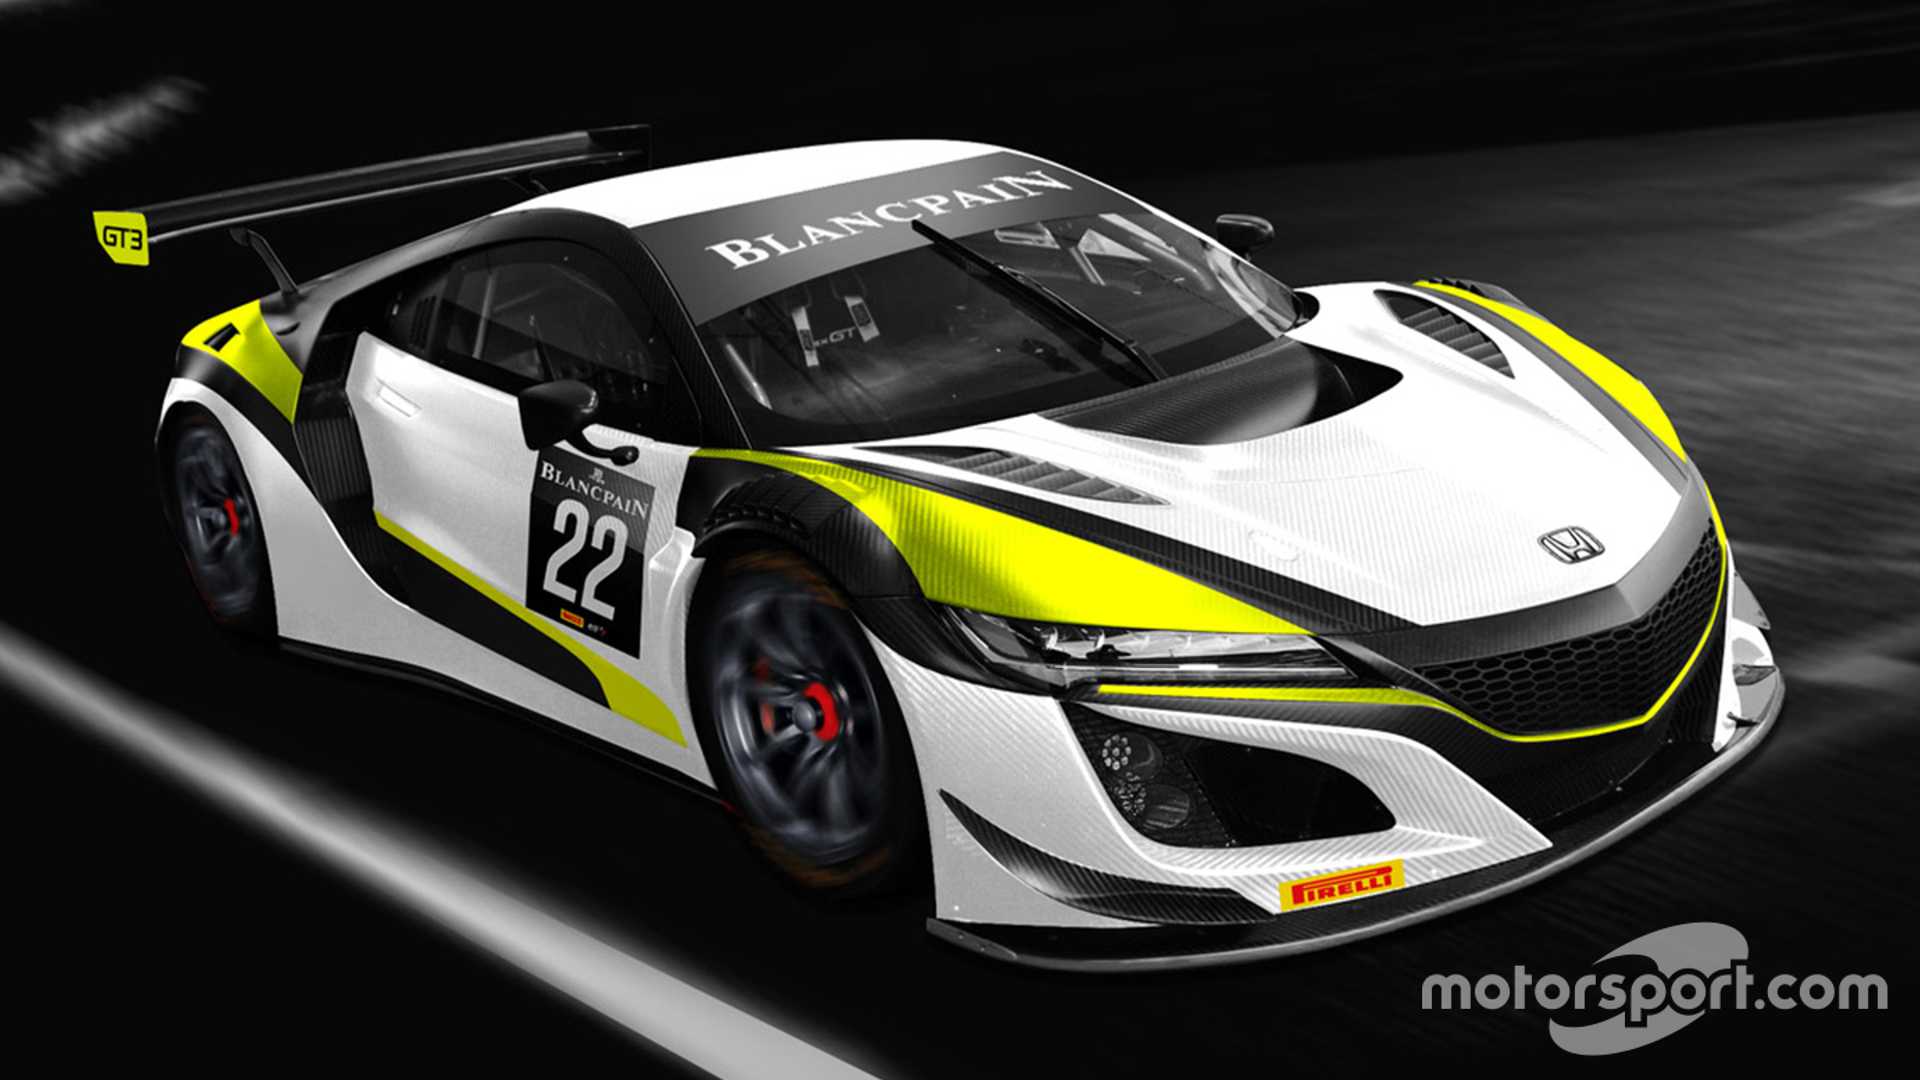 Jenson Button to race Honda NSX GT3 in Blancpain series